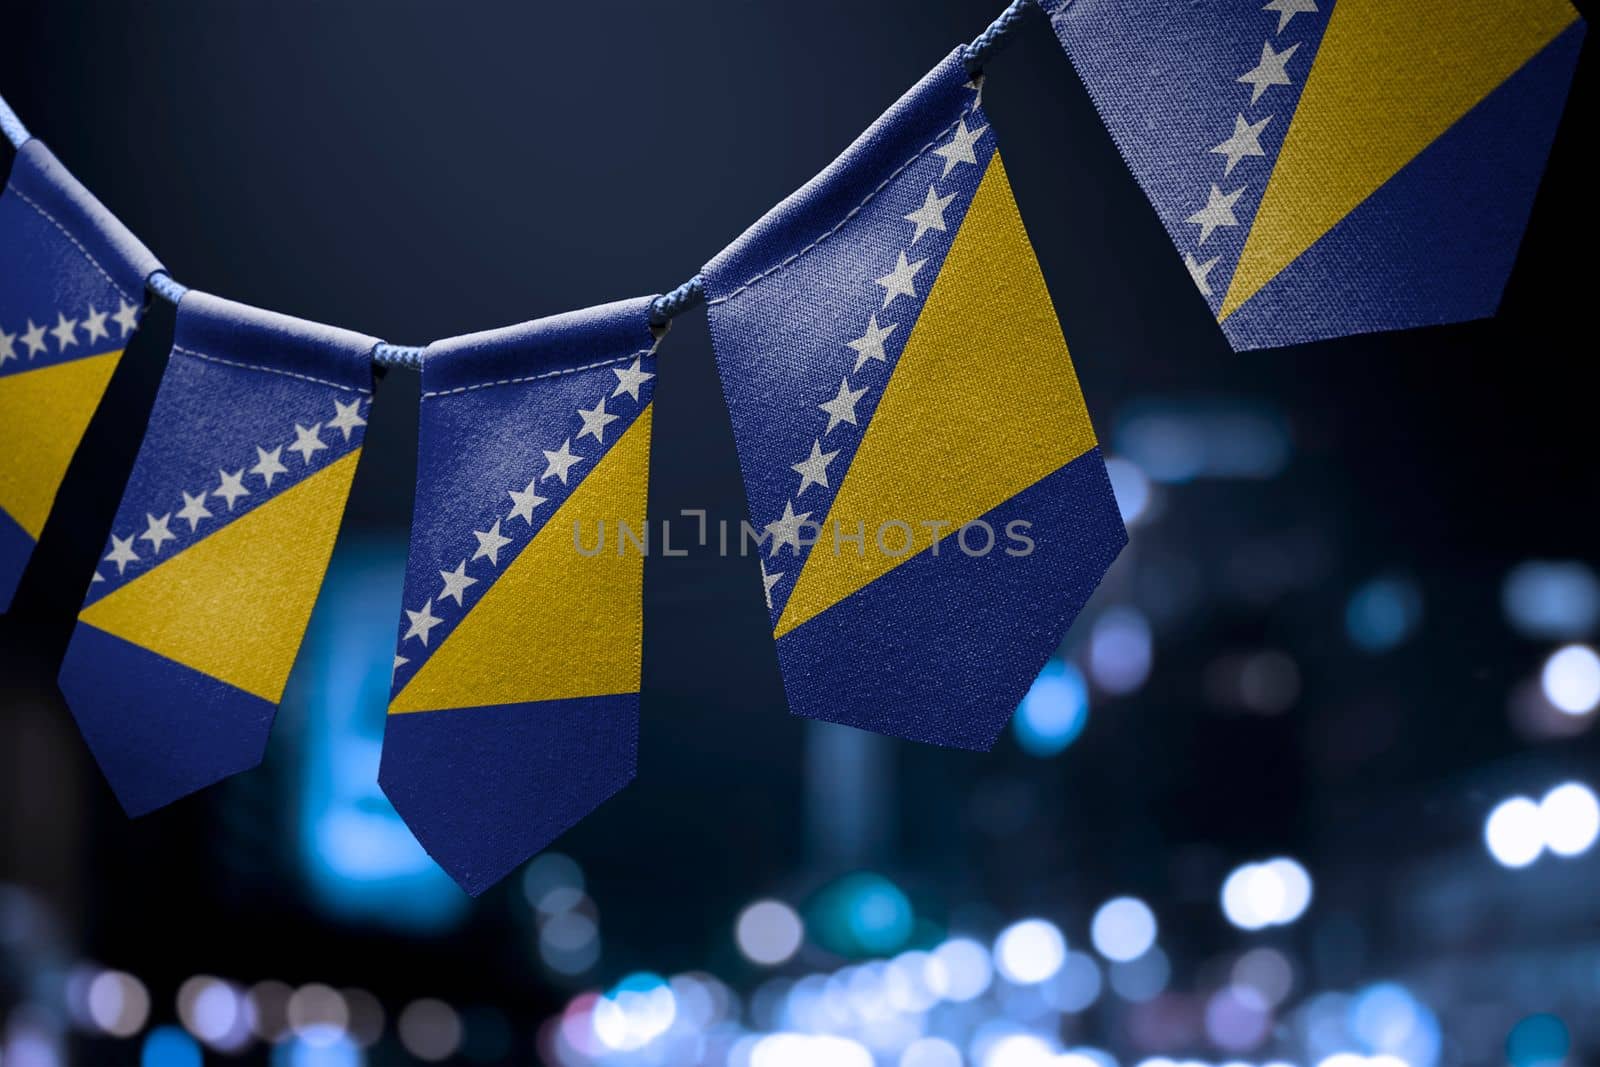 A garland of Bosnia and Herzegovina national flags on an abstract blurred background.